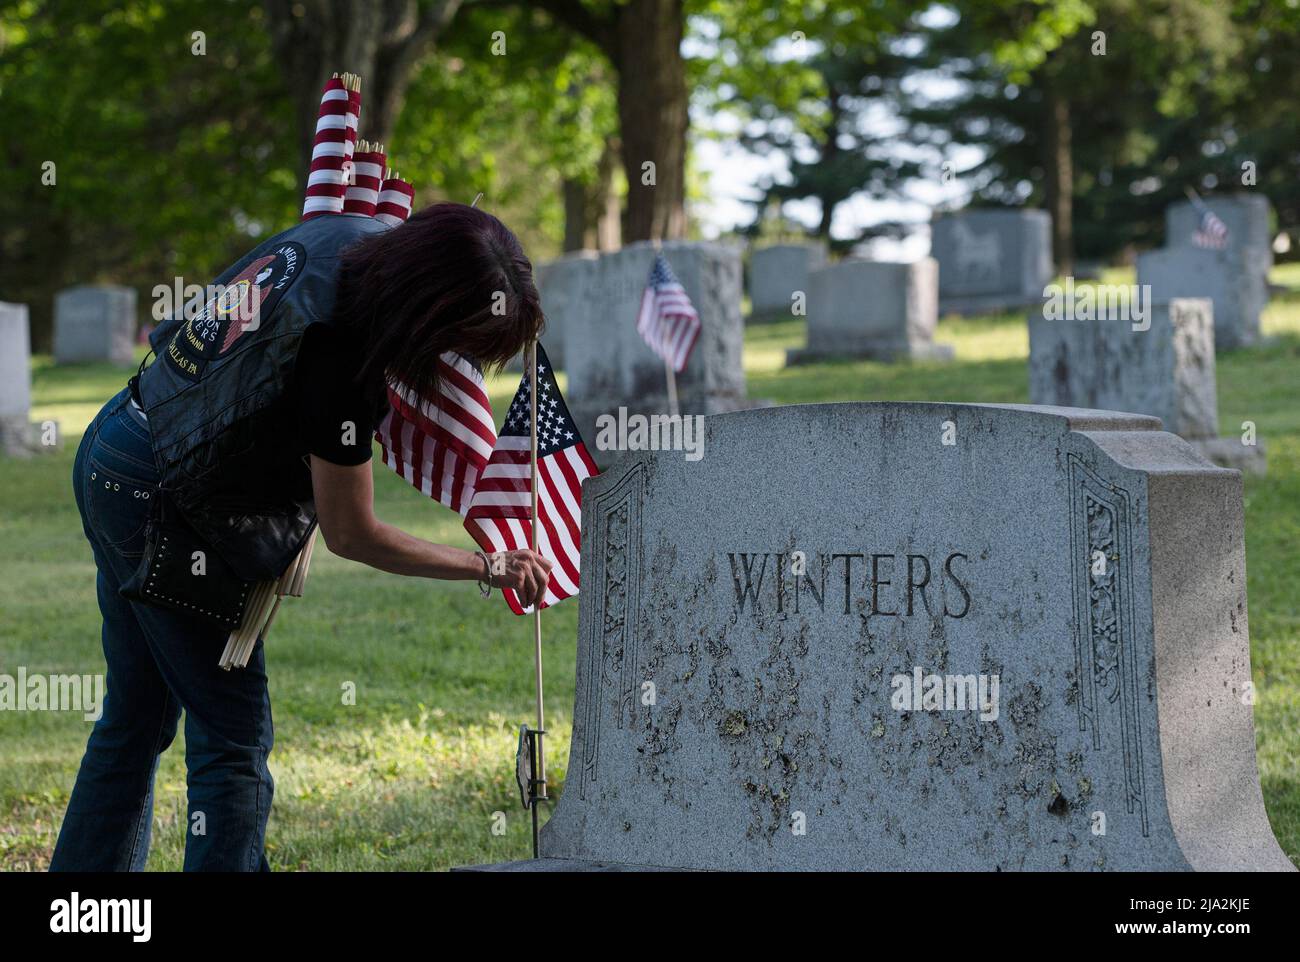 Dallas, United States. 25th May, 2022. A woman replaces a flag on a gravesite for Memorial Day. Members of the American Legion, Boy Scouts and Girl Scouts have been replacing tattered flags throughout cemeteries in preparation for the Memorial Day Holiday. (Photo by Aimee Dilger/SOPA Images/Sipa USA) Credit: Sipa USA/Alamy Live News Stock Photo